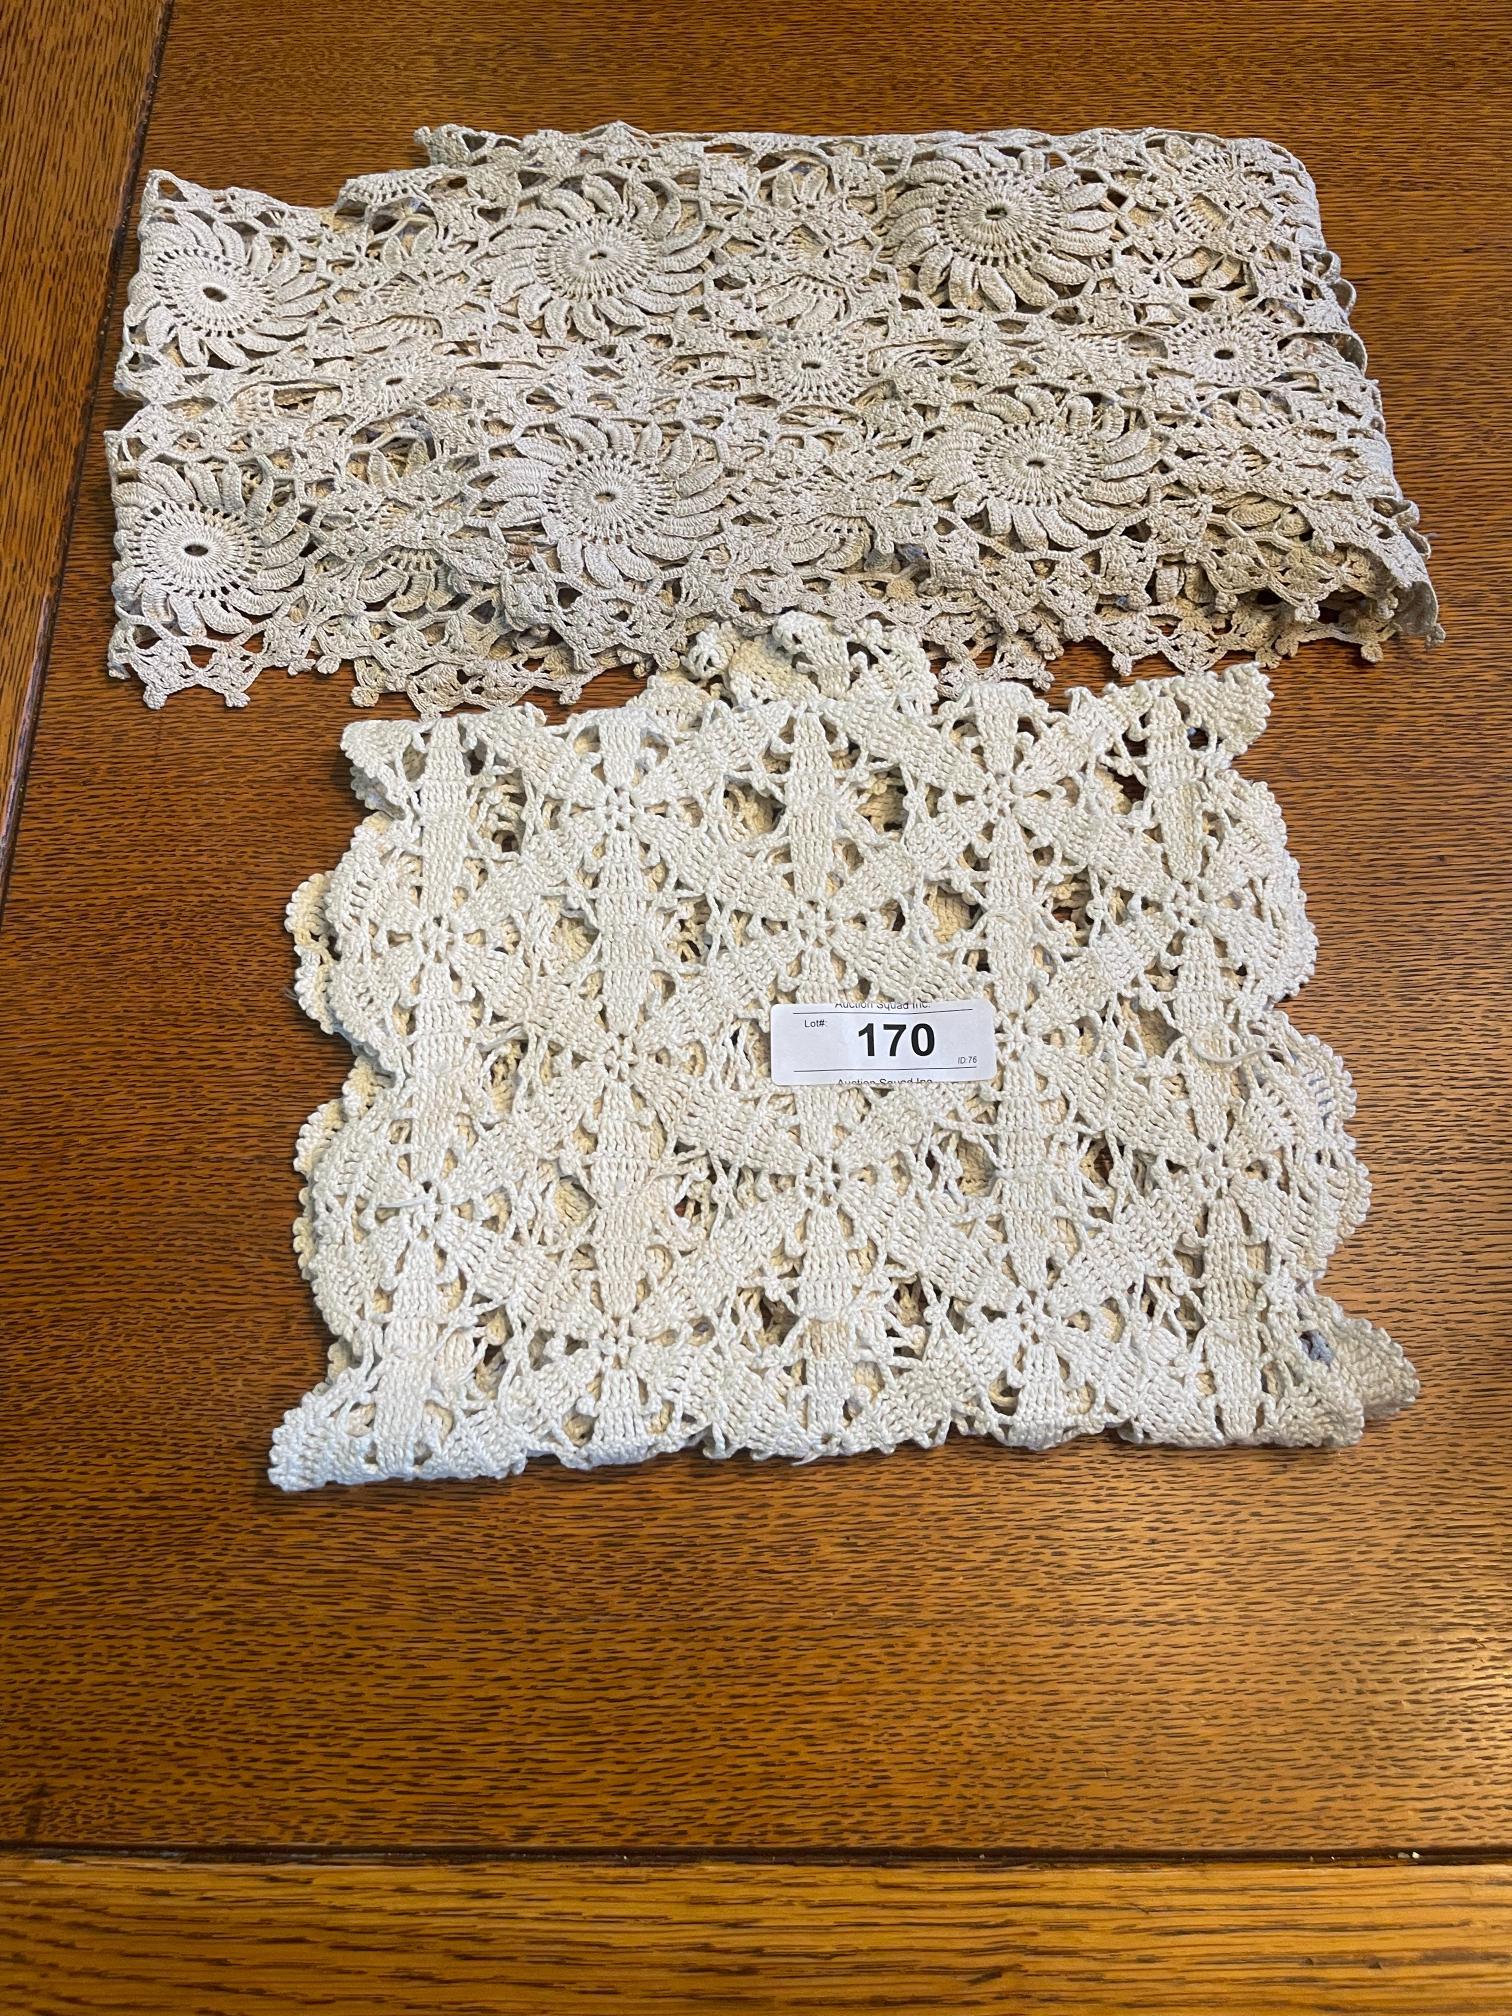 (2) Crocheted Table Runners